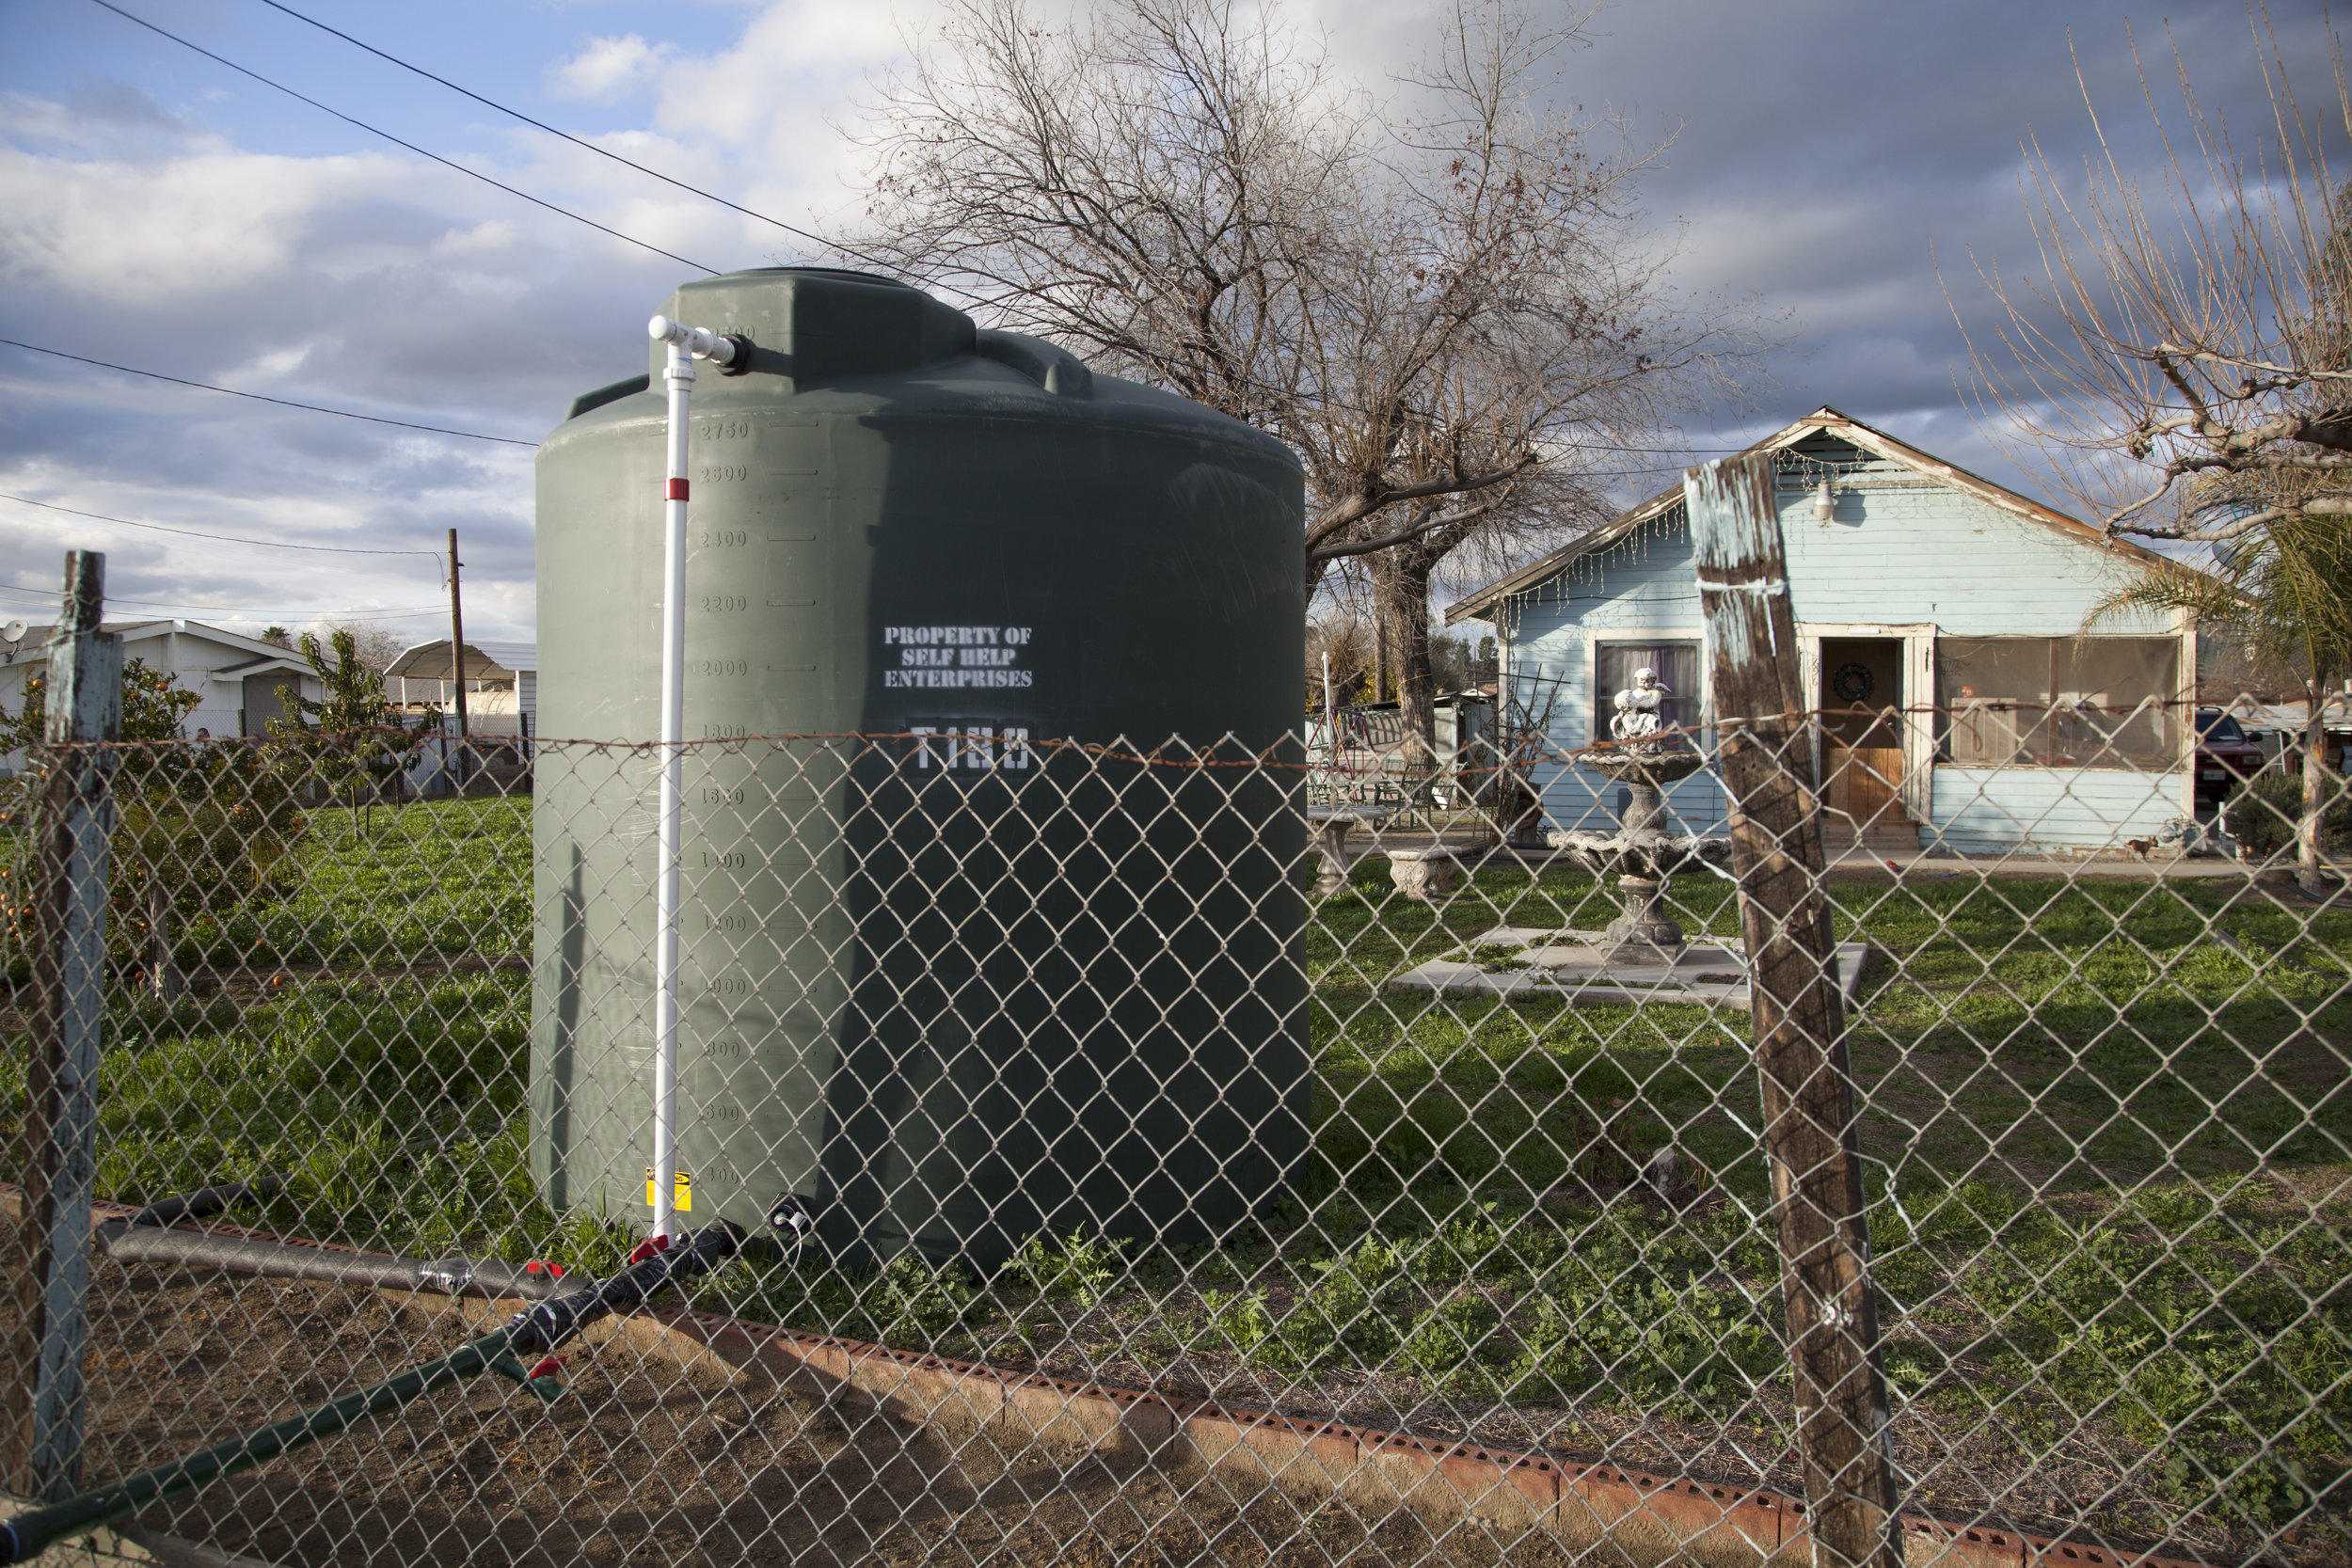  Finally 2500 gallon tanks were installed in people’s yards to provide non-potable water in their homes. 